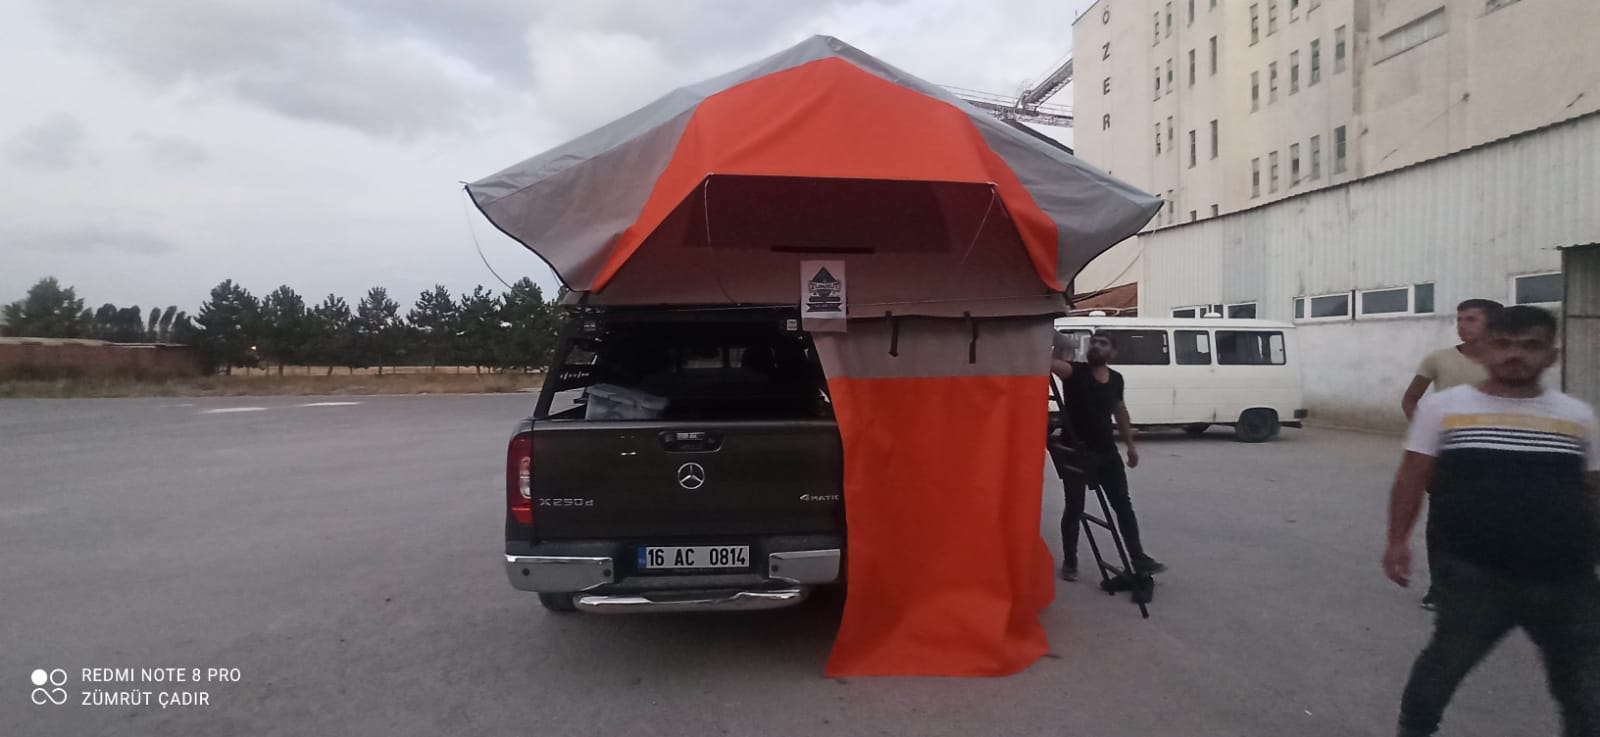 Rooftop Tents:All Season with Rainfly Shoes Bag Ladder 2+1 Pax Large Door High Density Mattress - 0